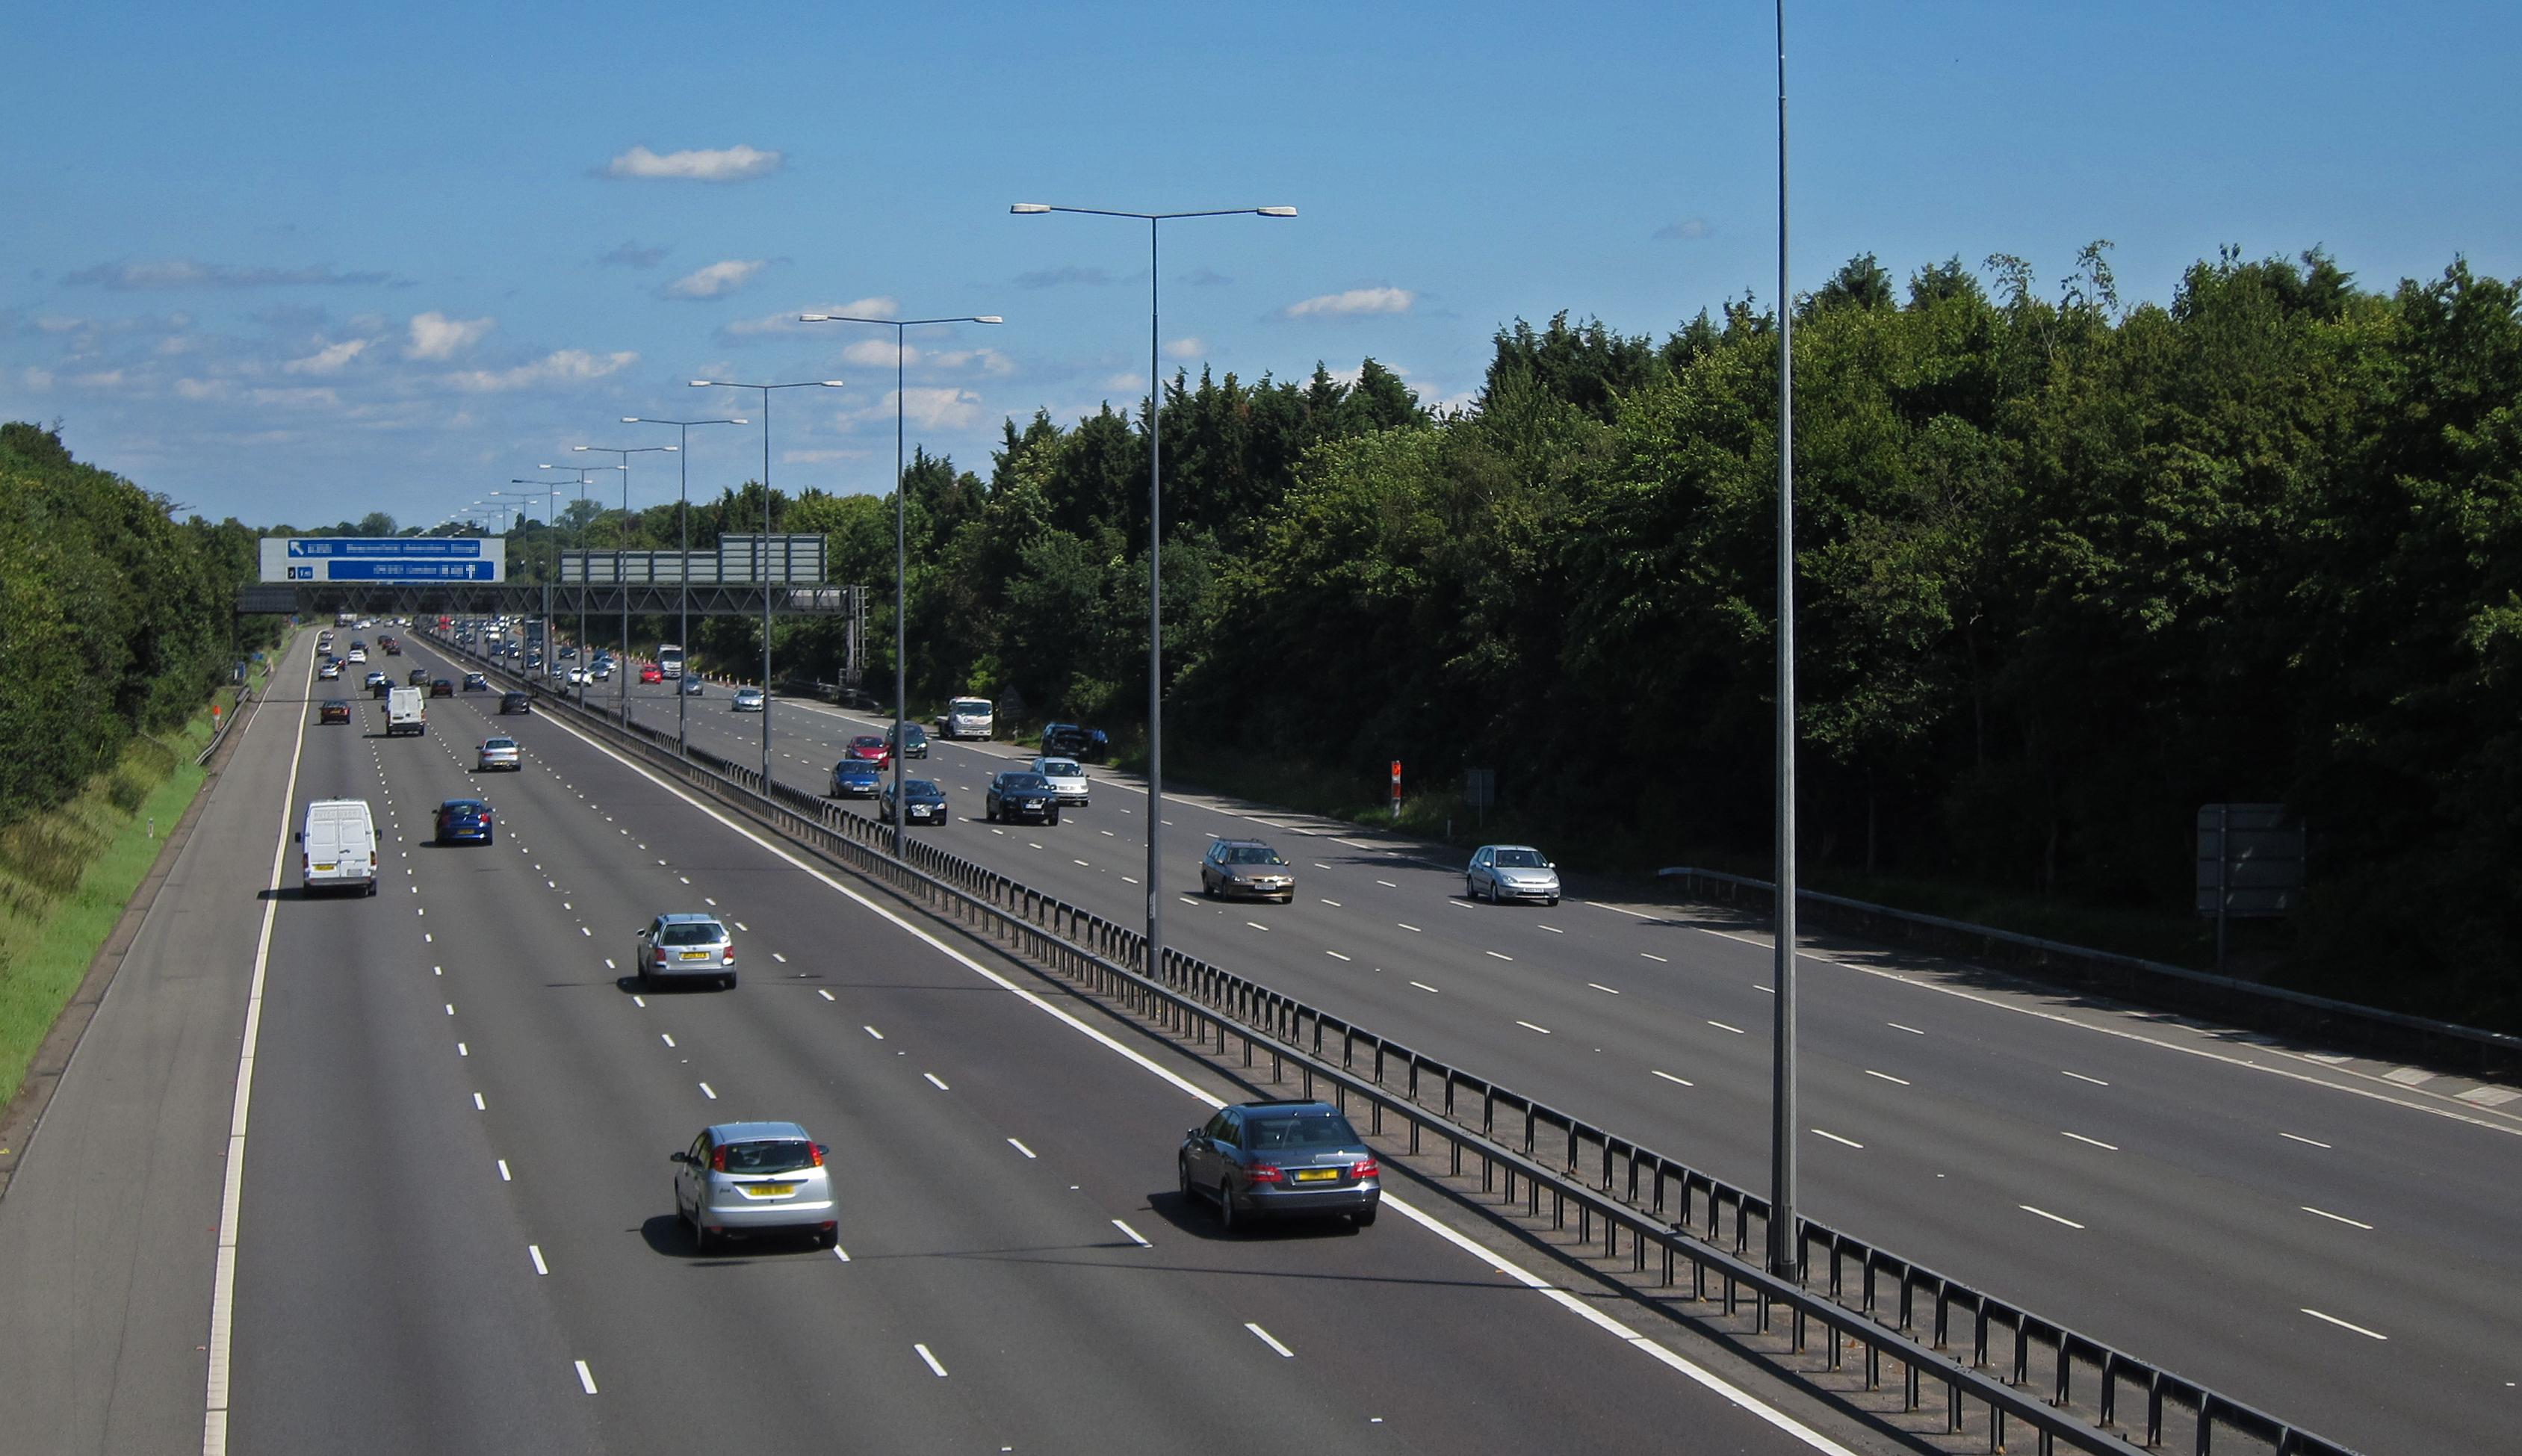 UK motorway with cars on it 